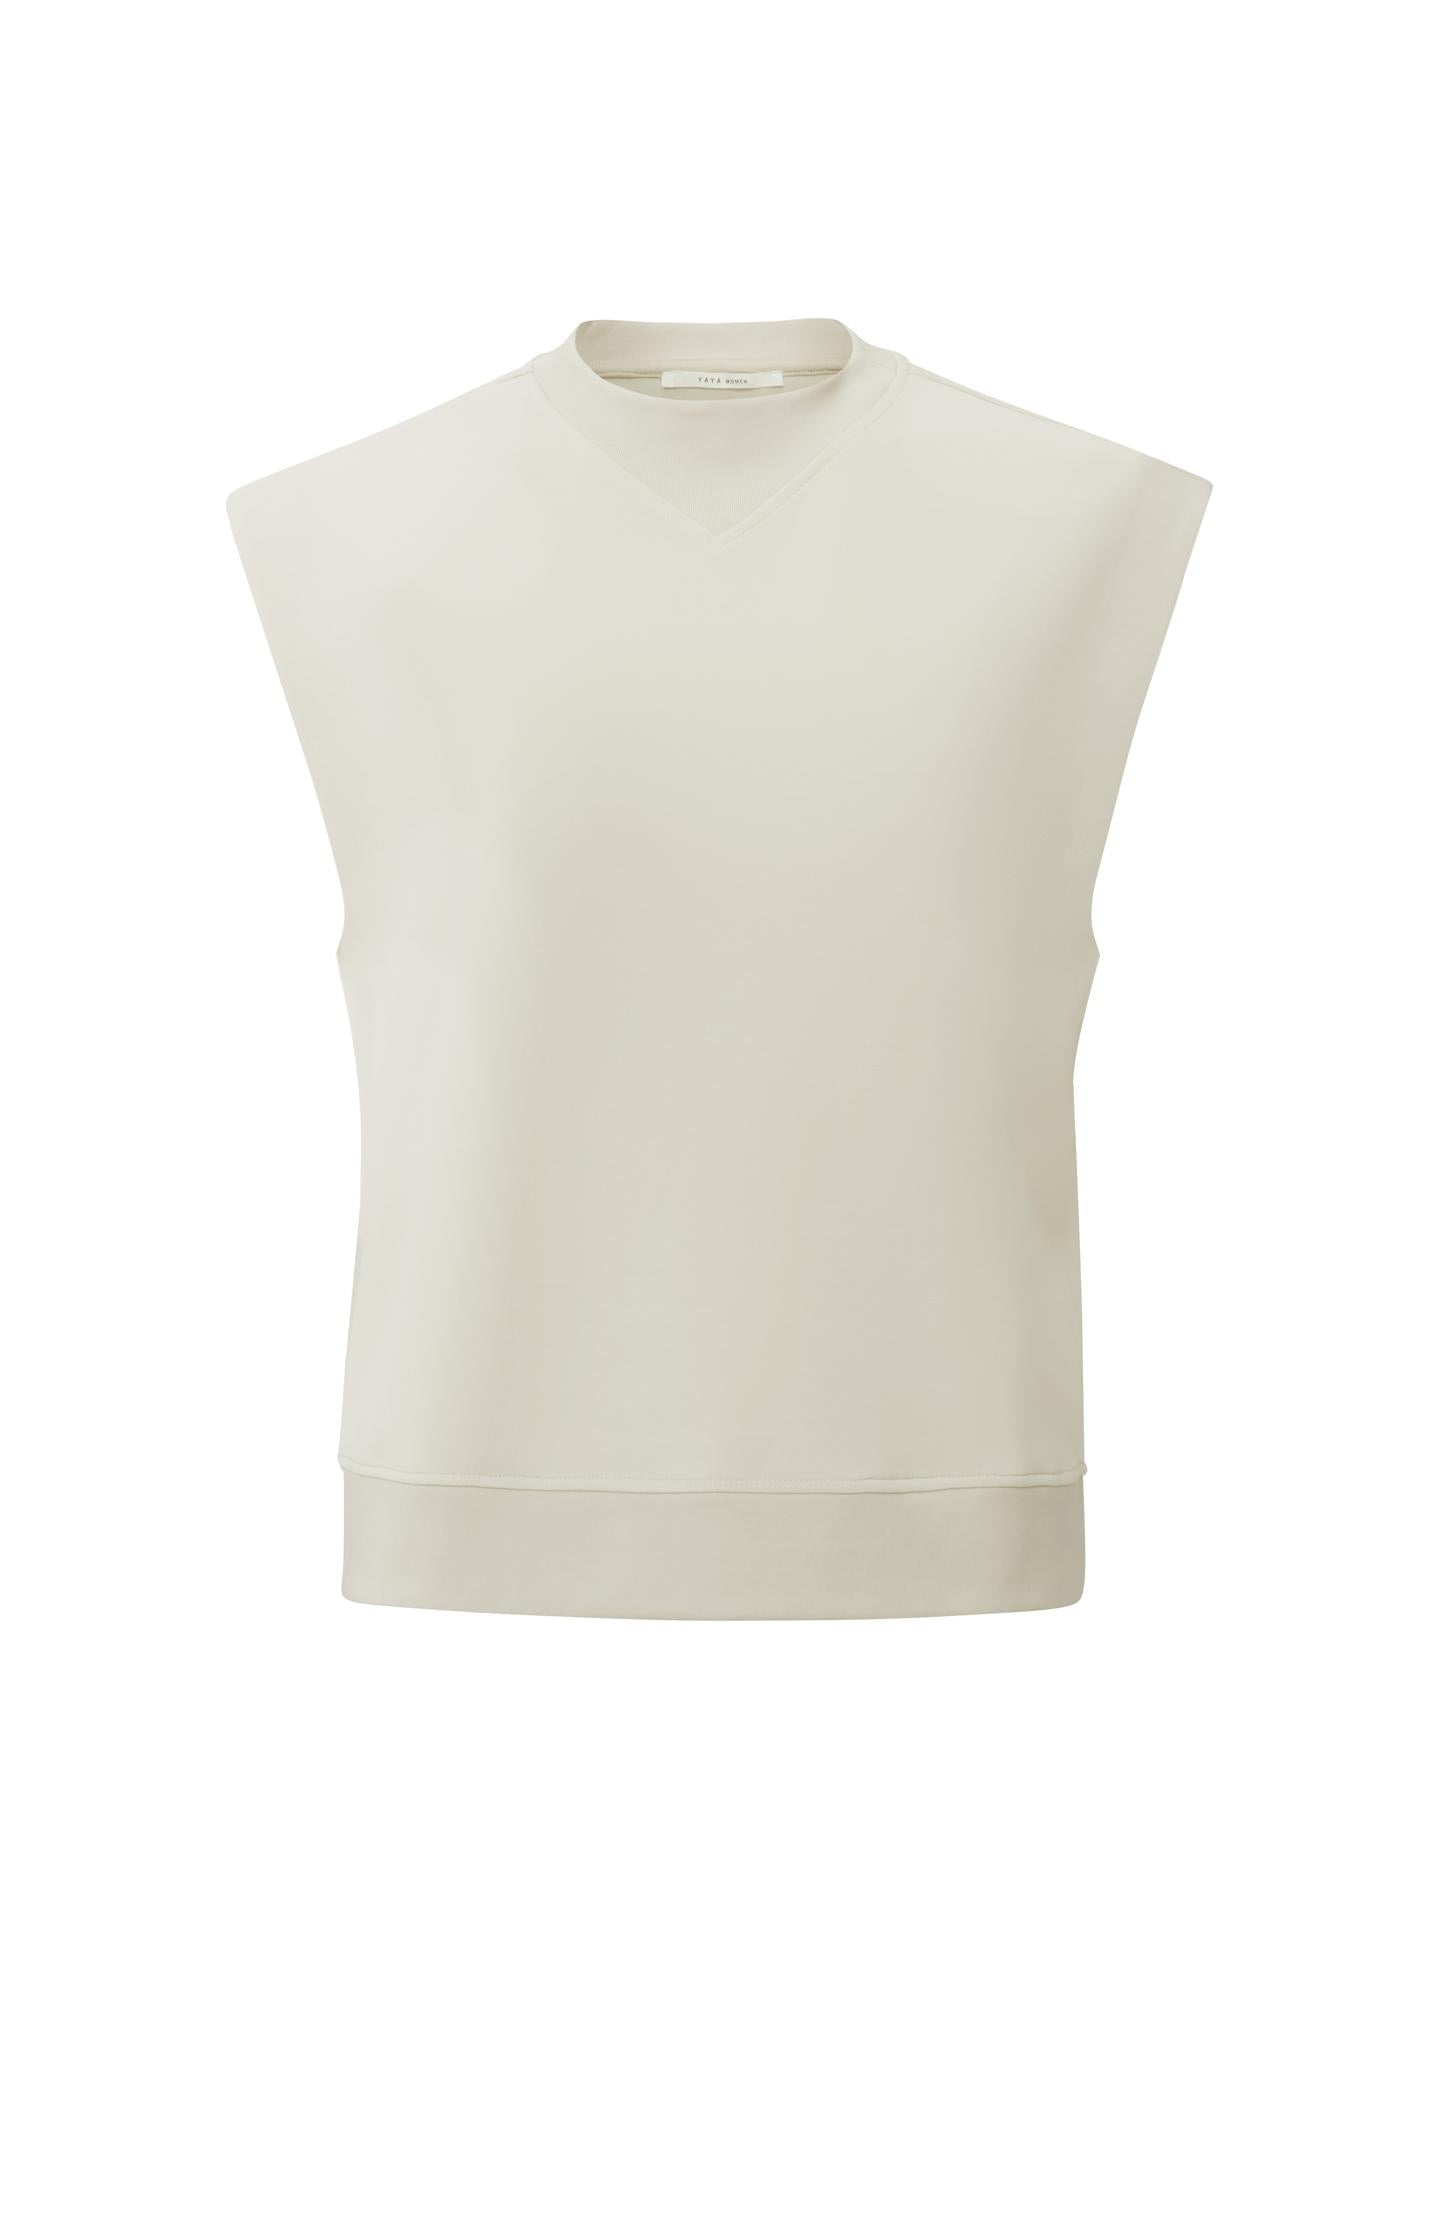 Sleeveless sweatshirt with crewneck crafted in soft scuba - Type: product